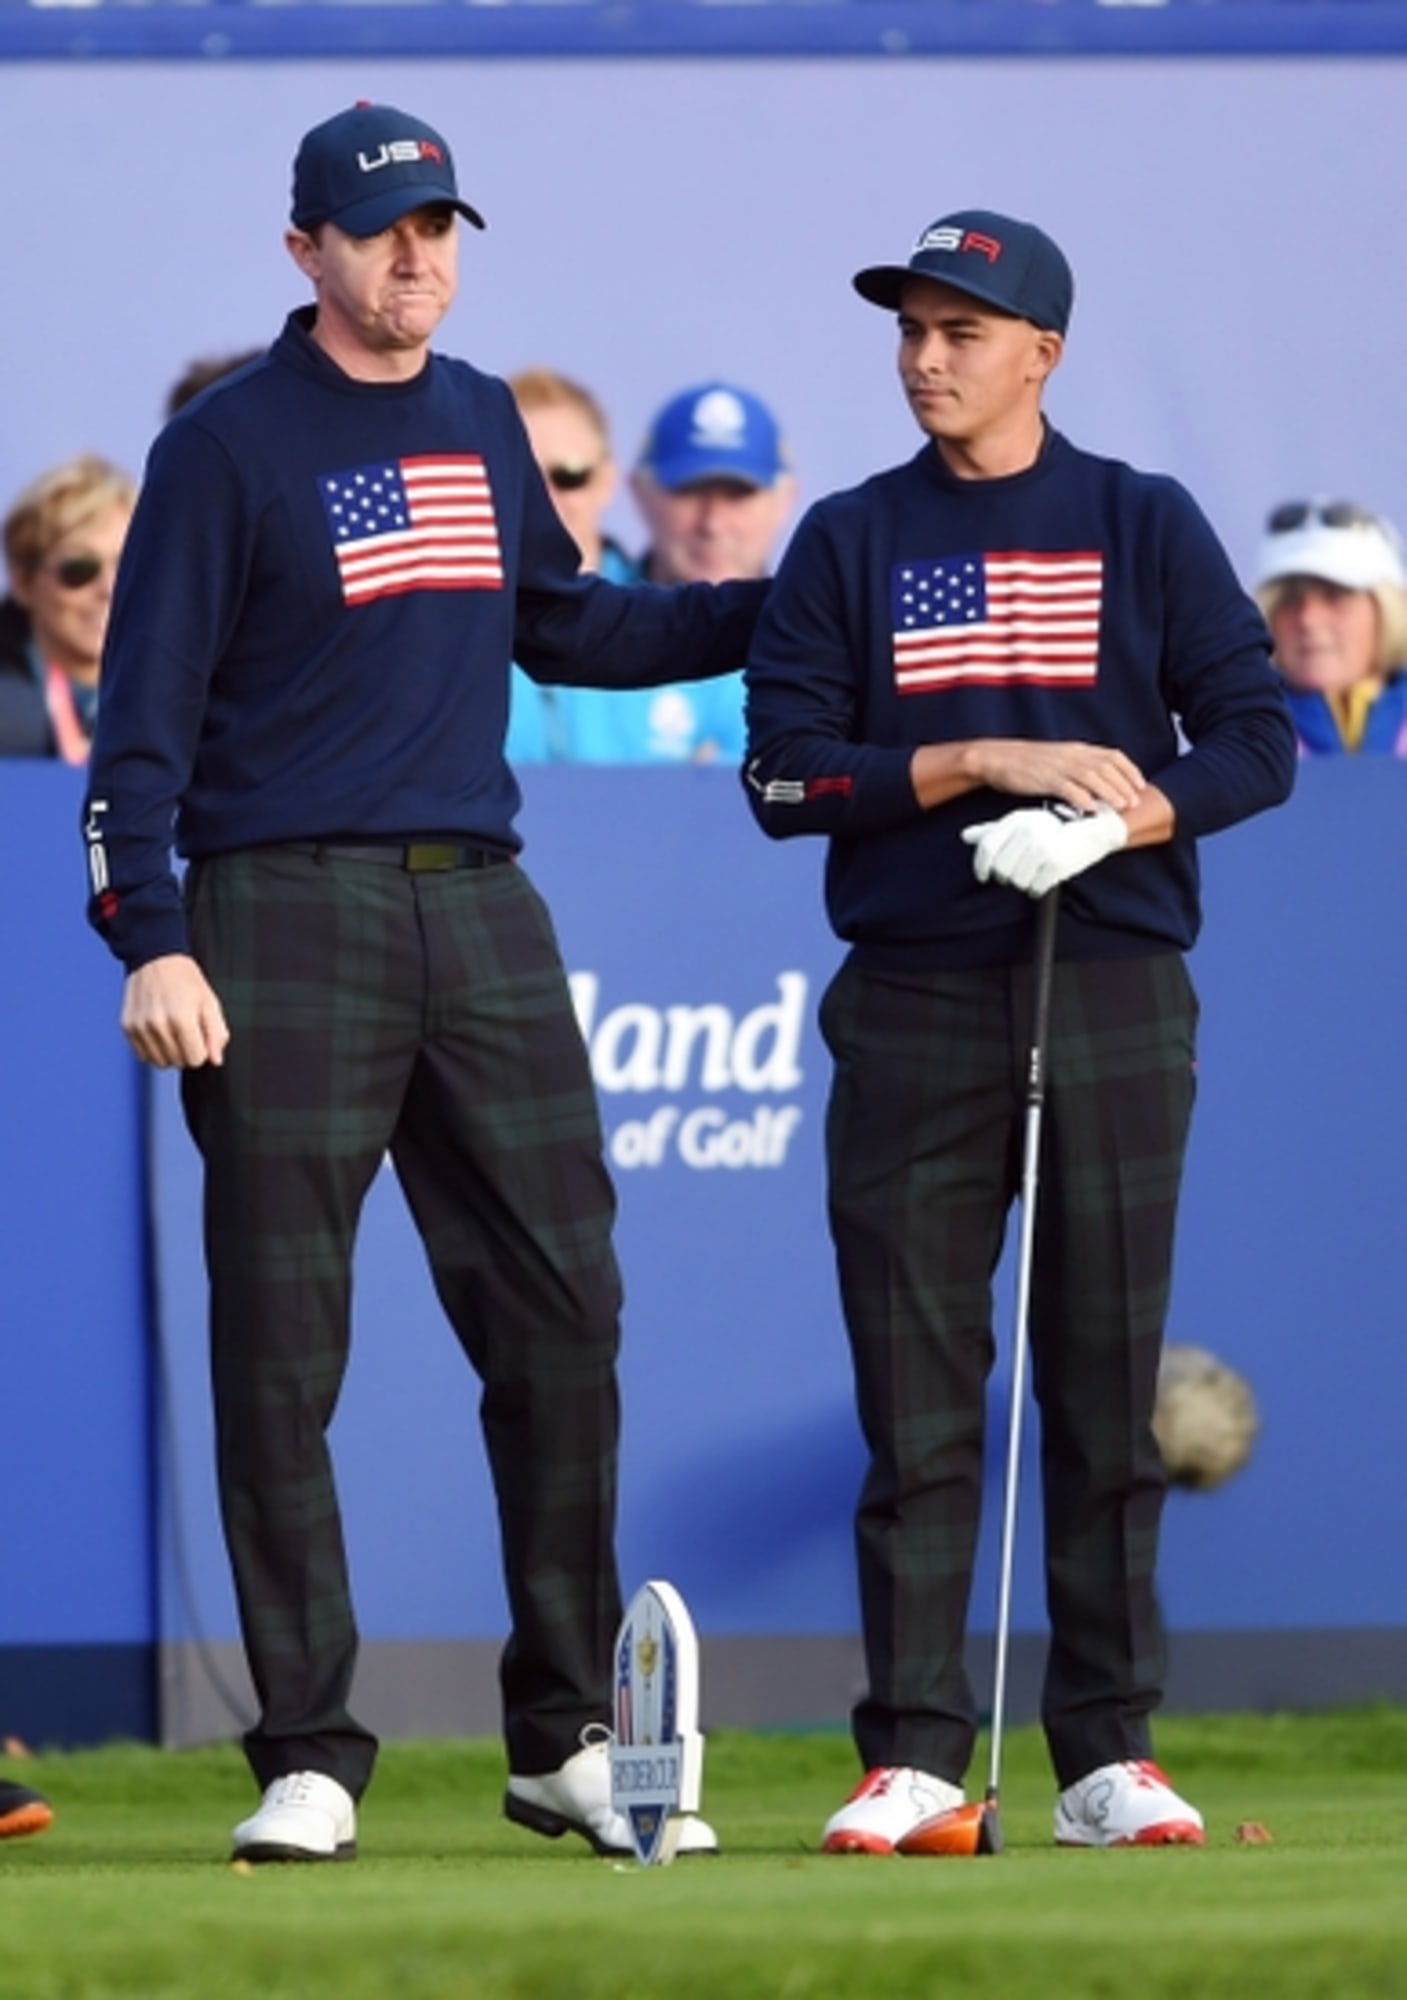 Ryder Cup Rickie Fowler and Jimmy Walker halve with Rory McIlroy and Ian Poulter, Europeans